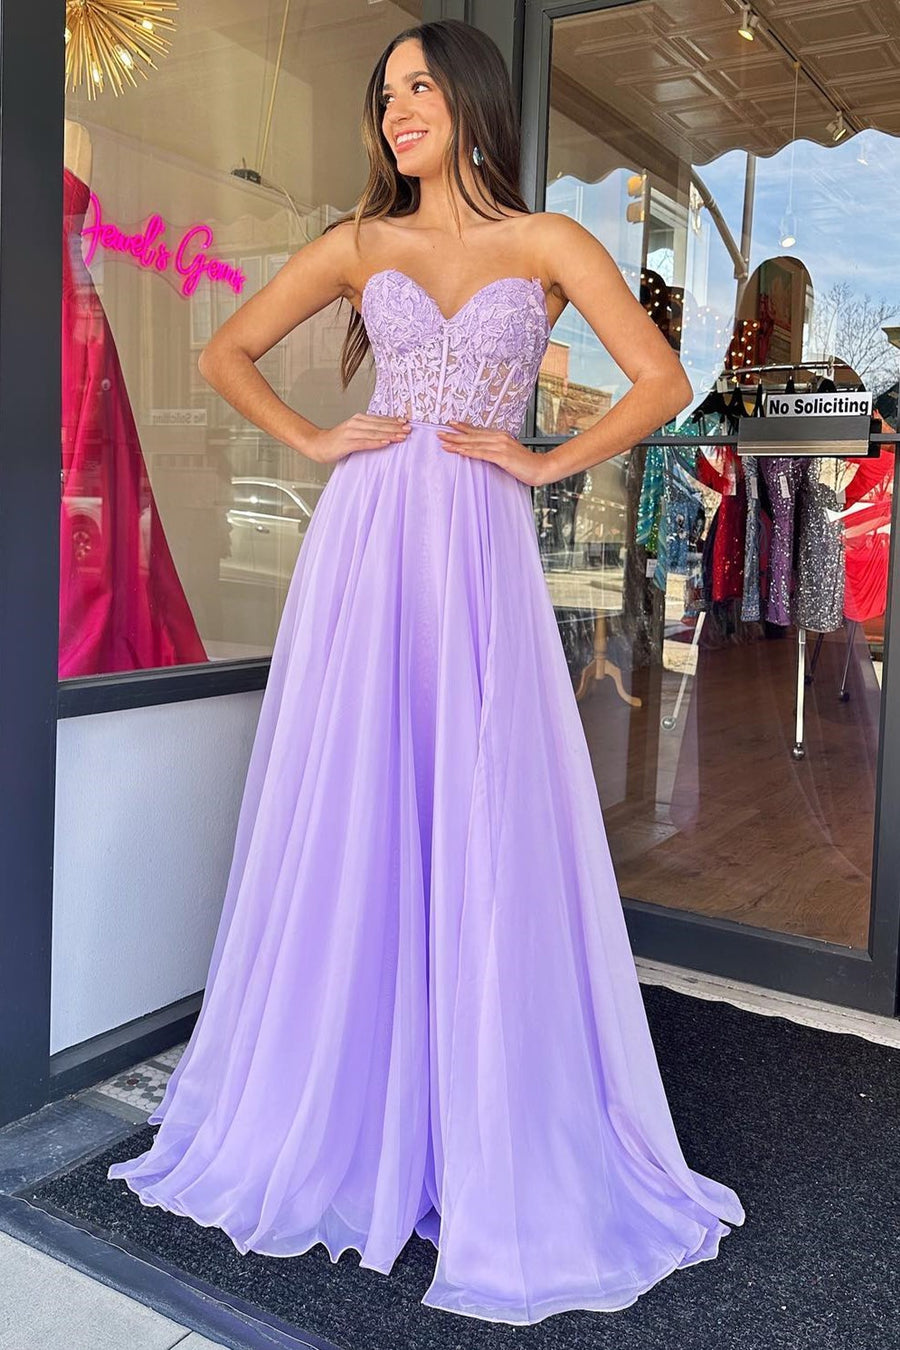 Lilac Chiffon Applique Sweetheart A-Line Prom Dress with Puff Sleeves